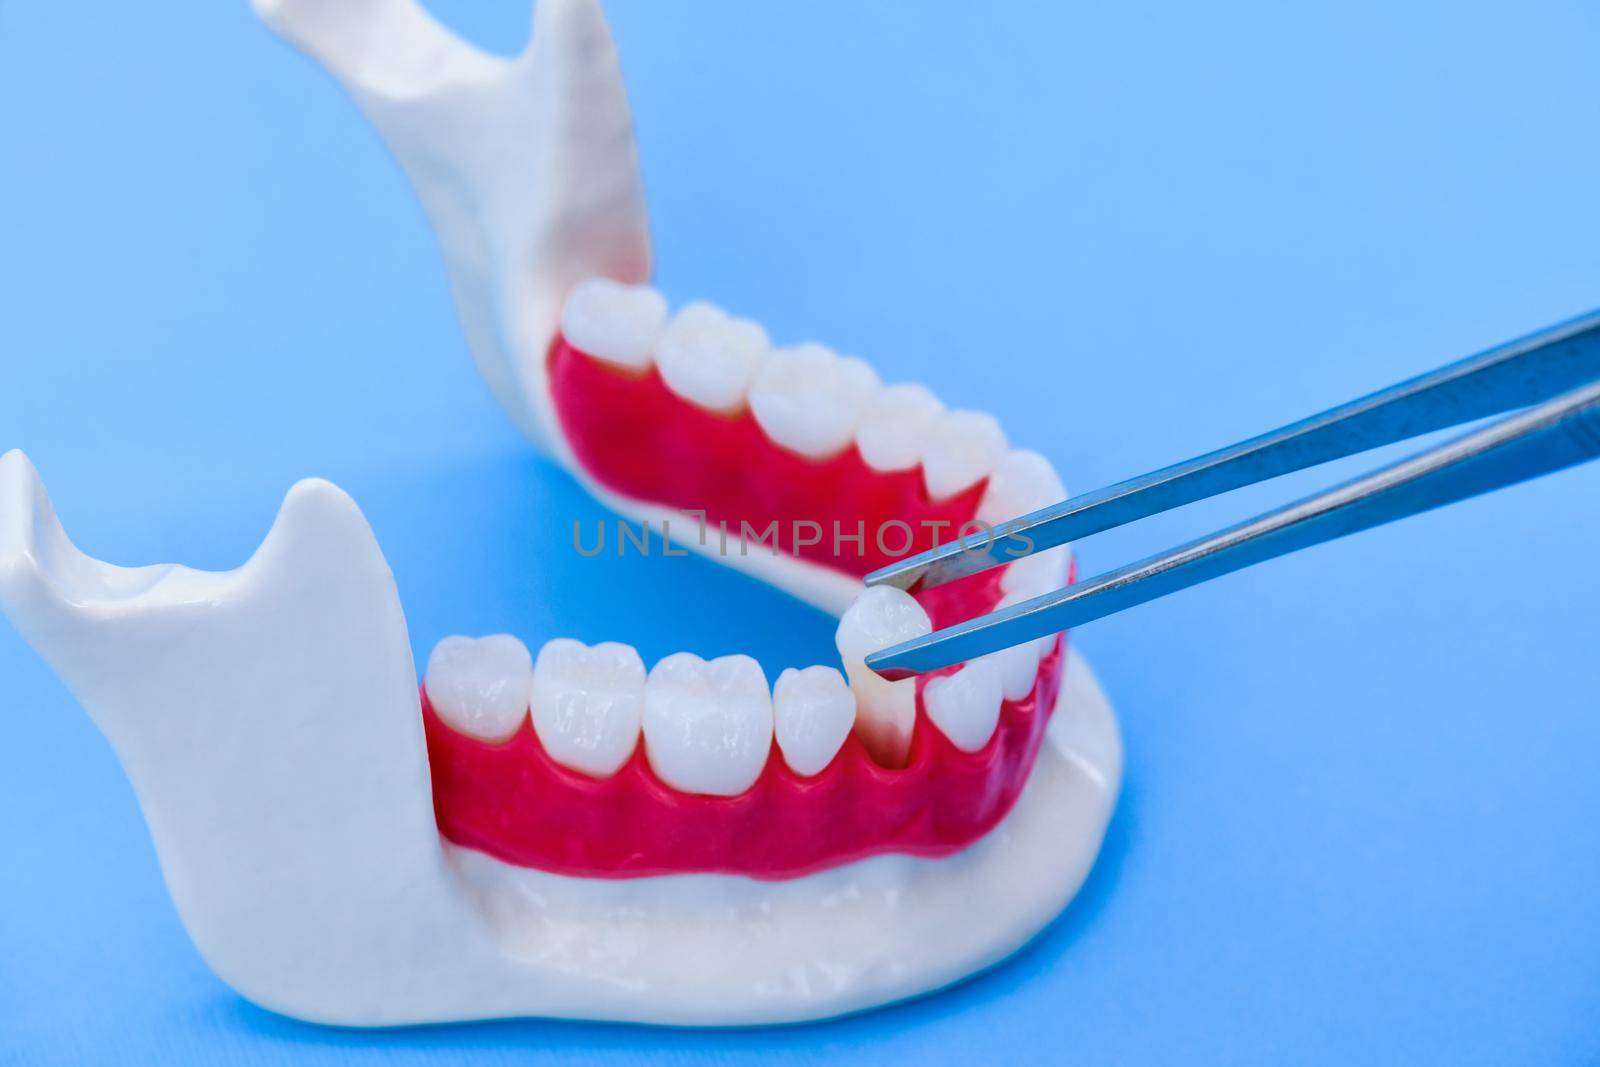 tweezers pulling tooth from the lower jaw anatomy model medical illustration isolated on blue background. Healthy teeth, dental care and orthodontic concept